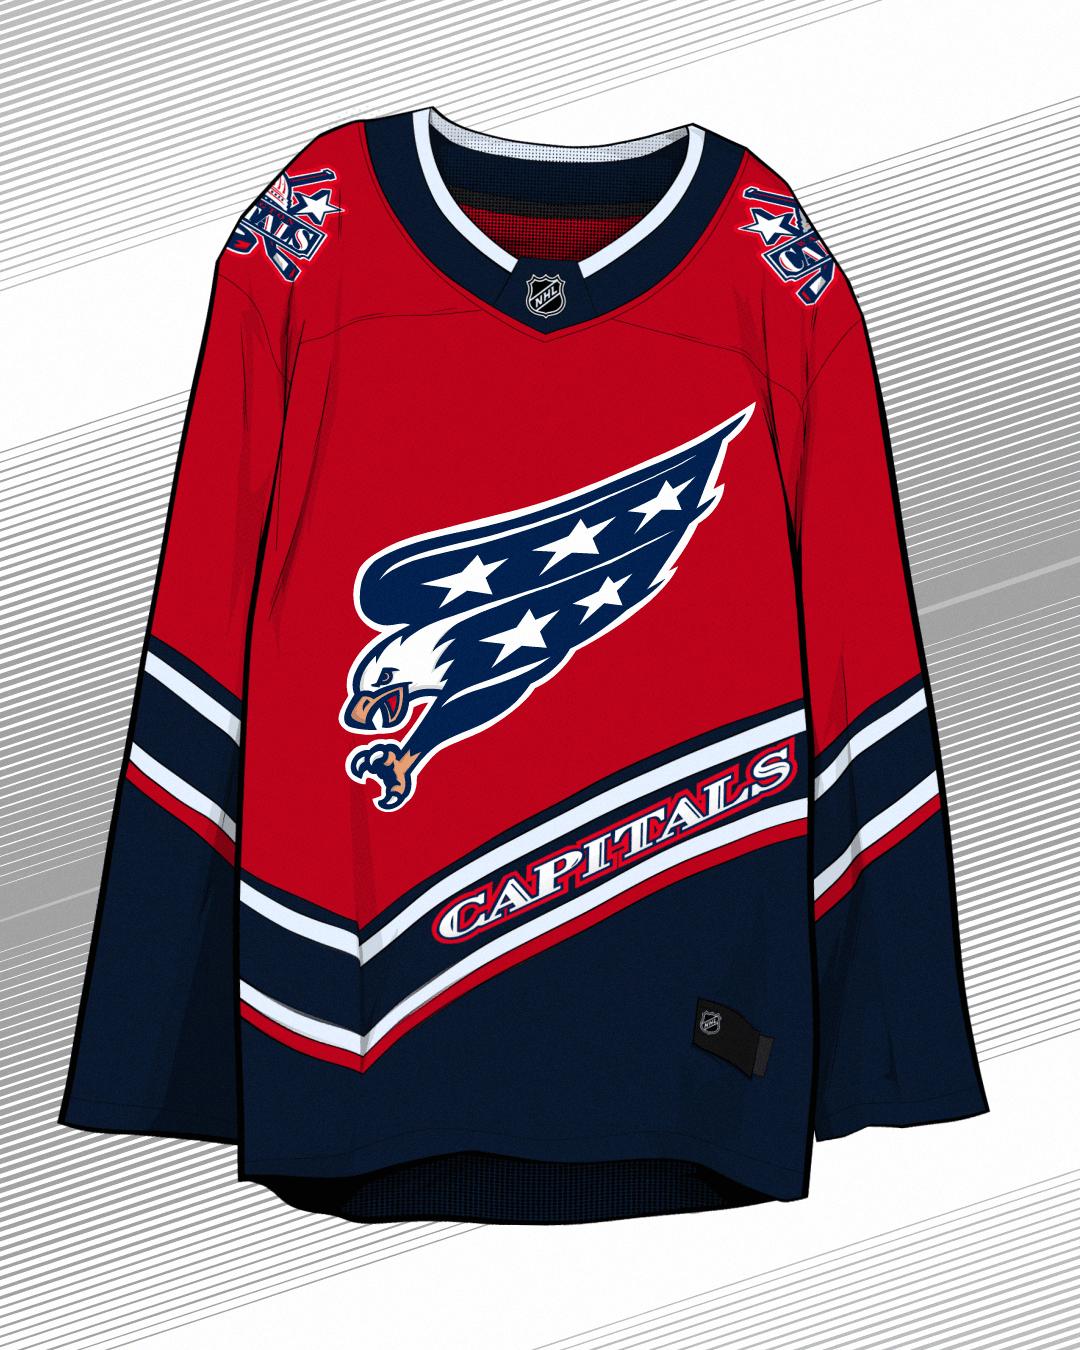 Screaming Eagle Digital Collectible Jersey